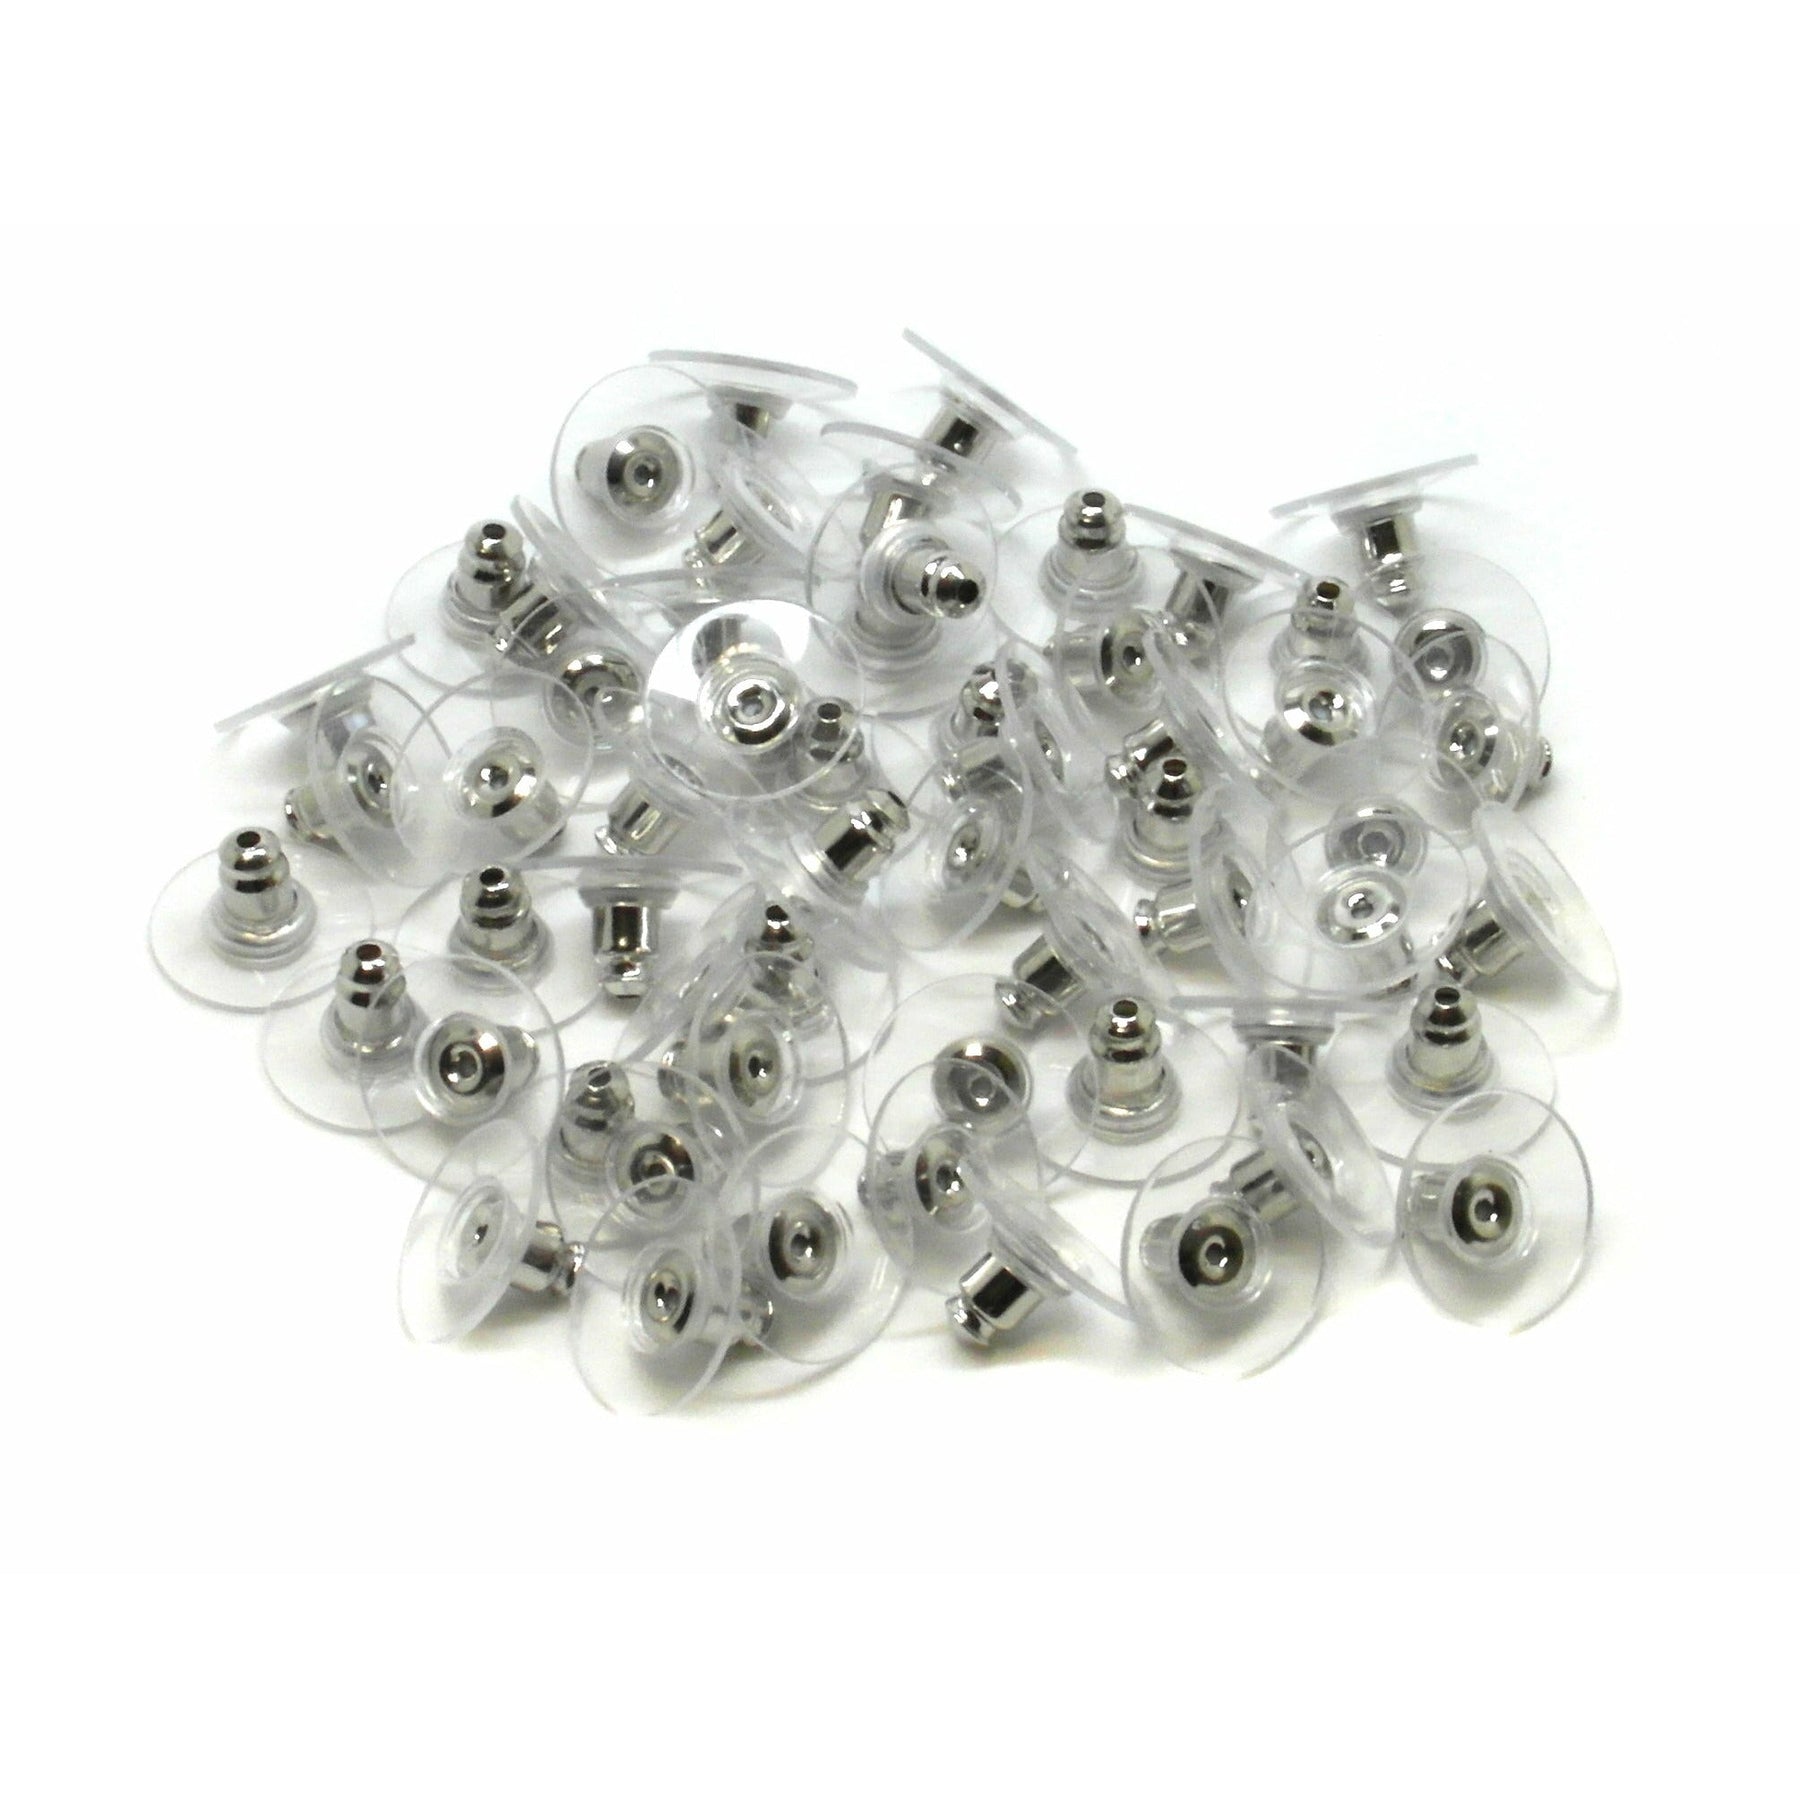 Plastic Earrings,Clear Plastic Earrings Post and Backs Silicone Clear Stud  Earrings 100 Pairs Back Earrings and Blank Pins Stud